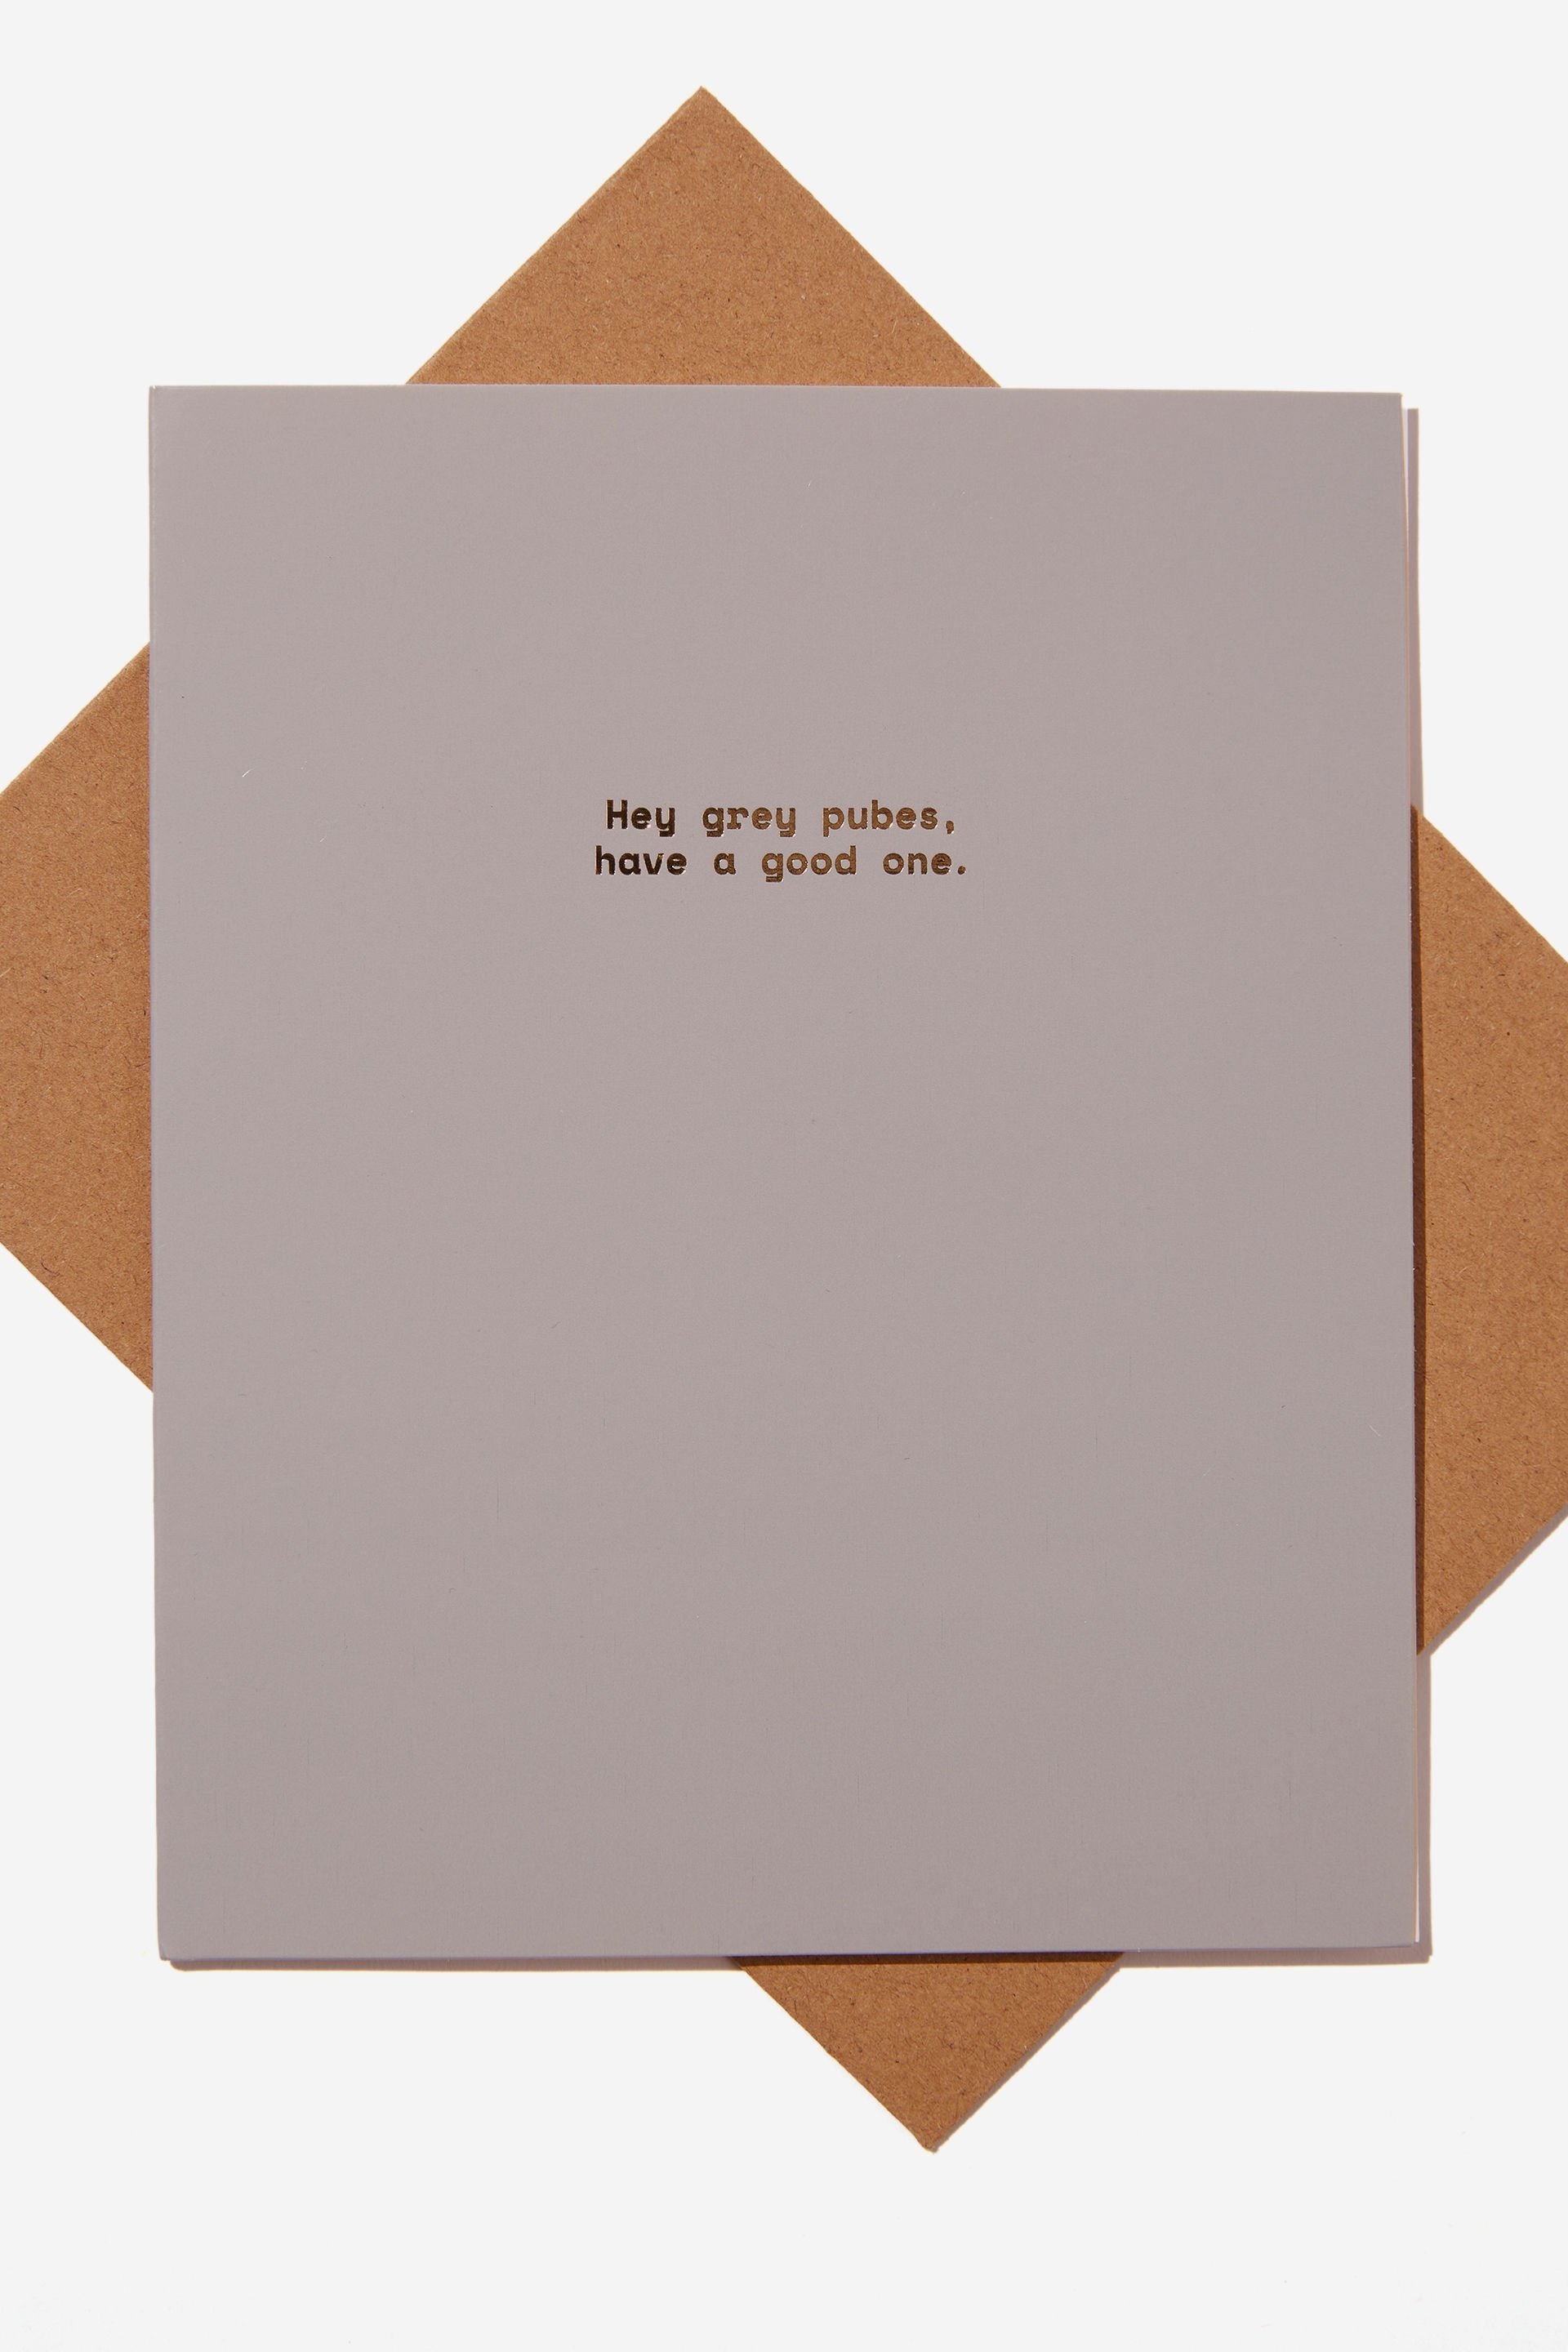 Typo - Funny Birthday Card - Grey pubes have a good one